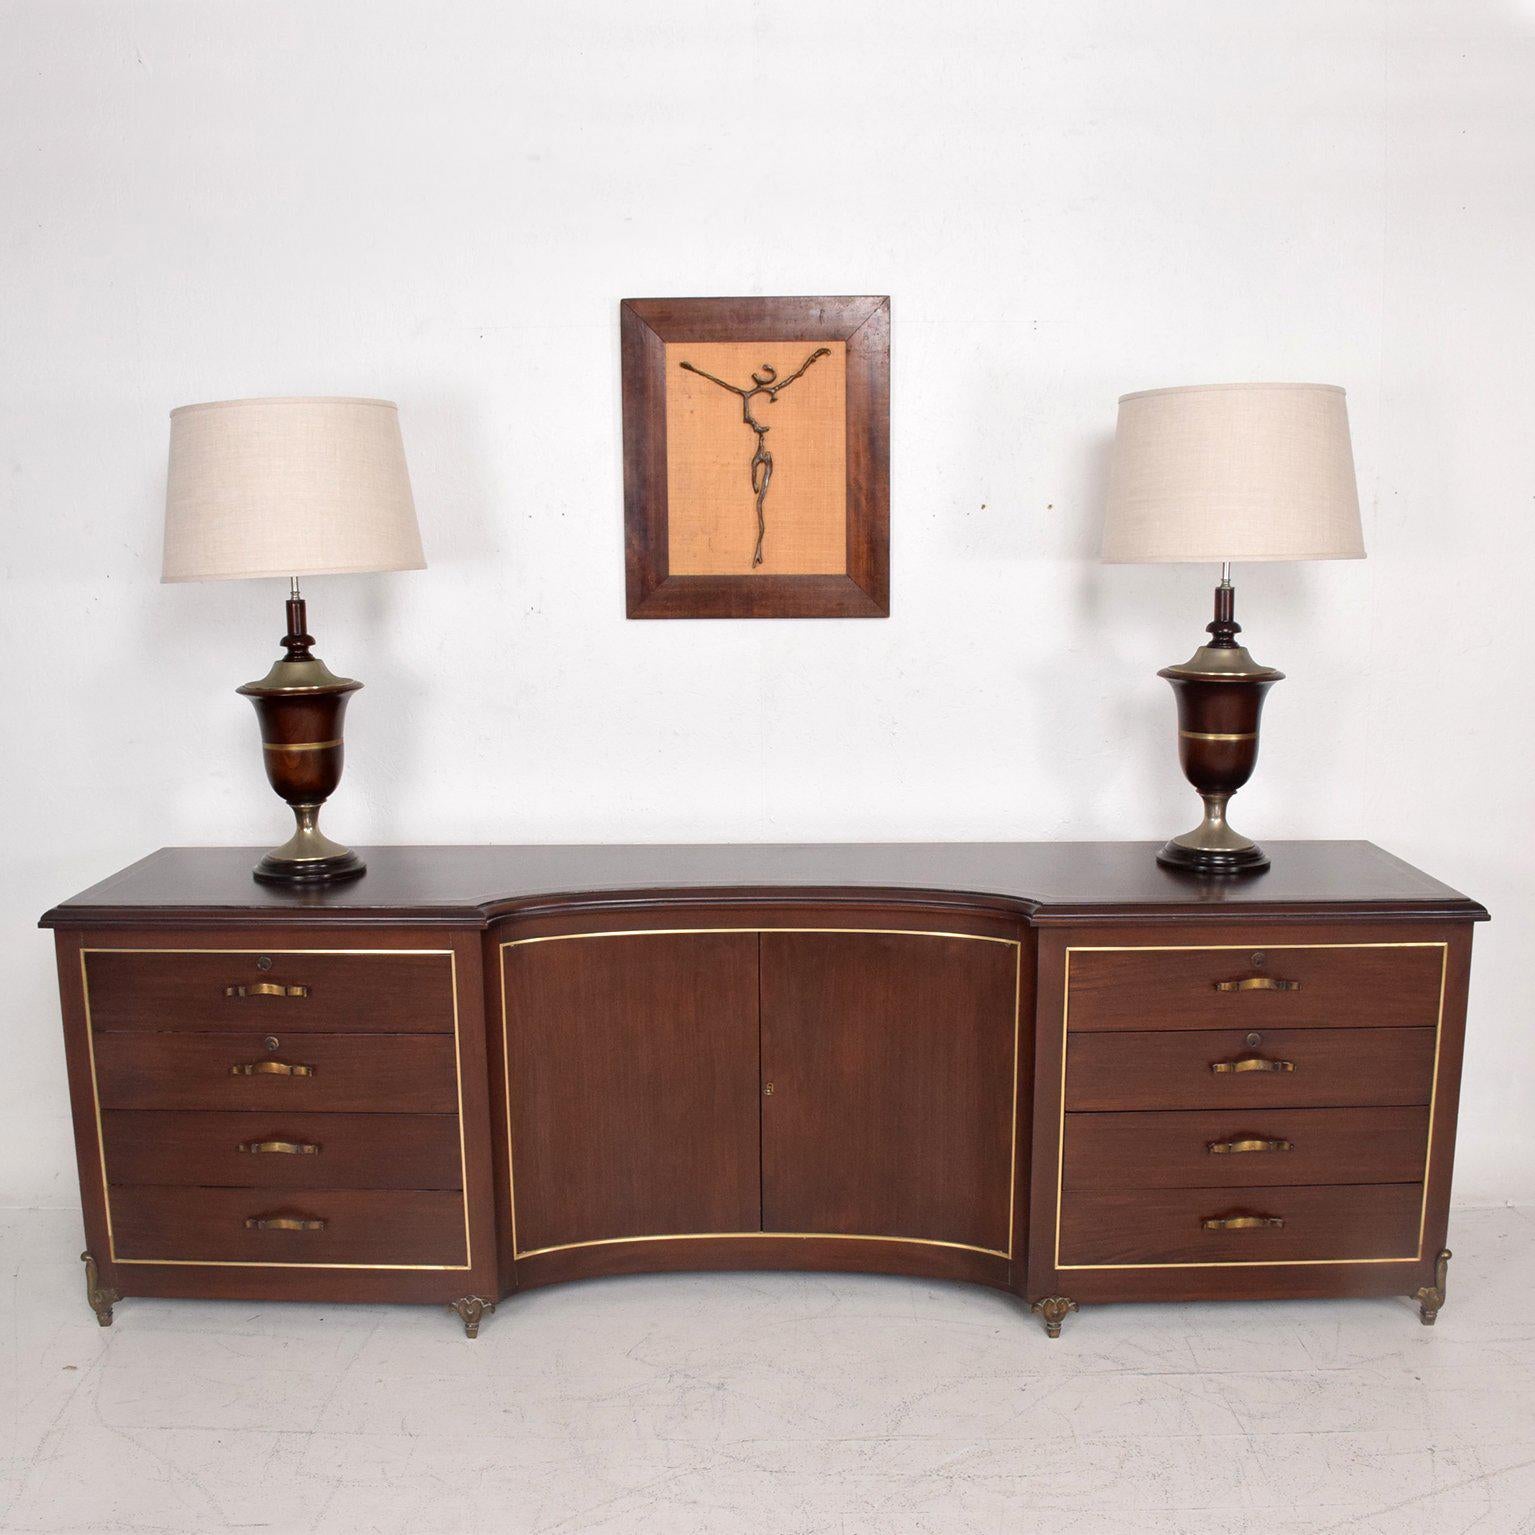 Pair of Neoclassical Table Lamps in Mahogany & Nickel-Plated, Mexican Modernist 5